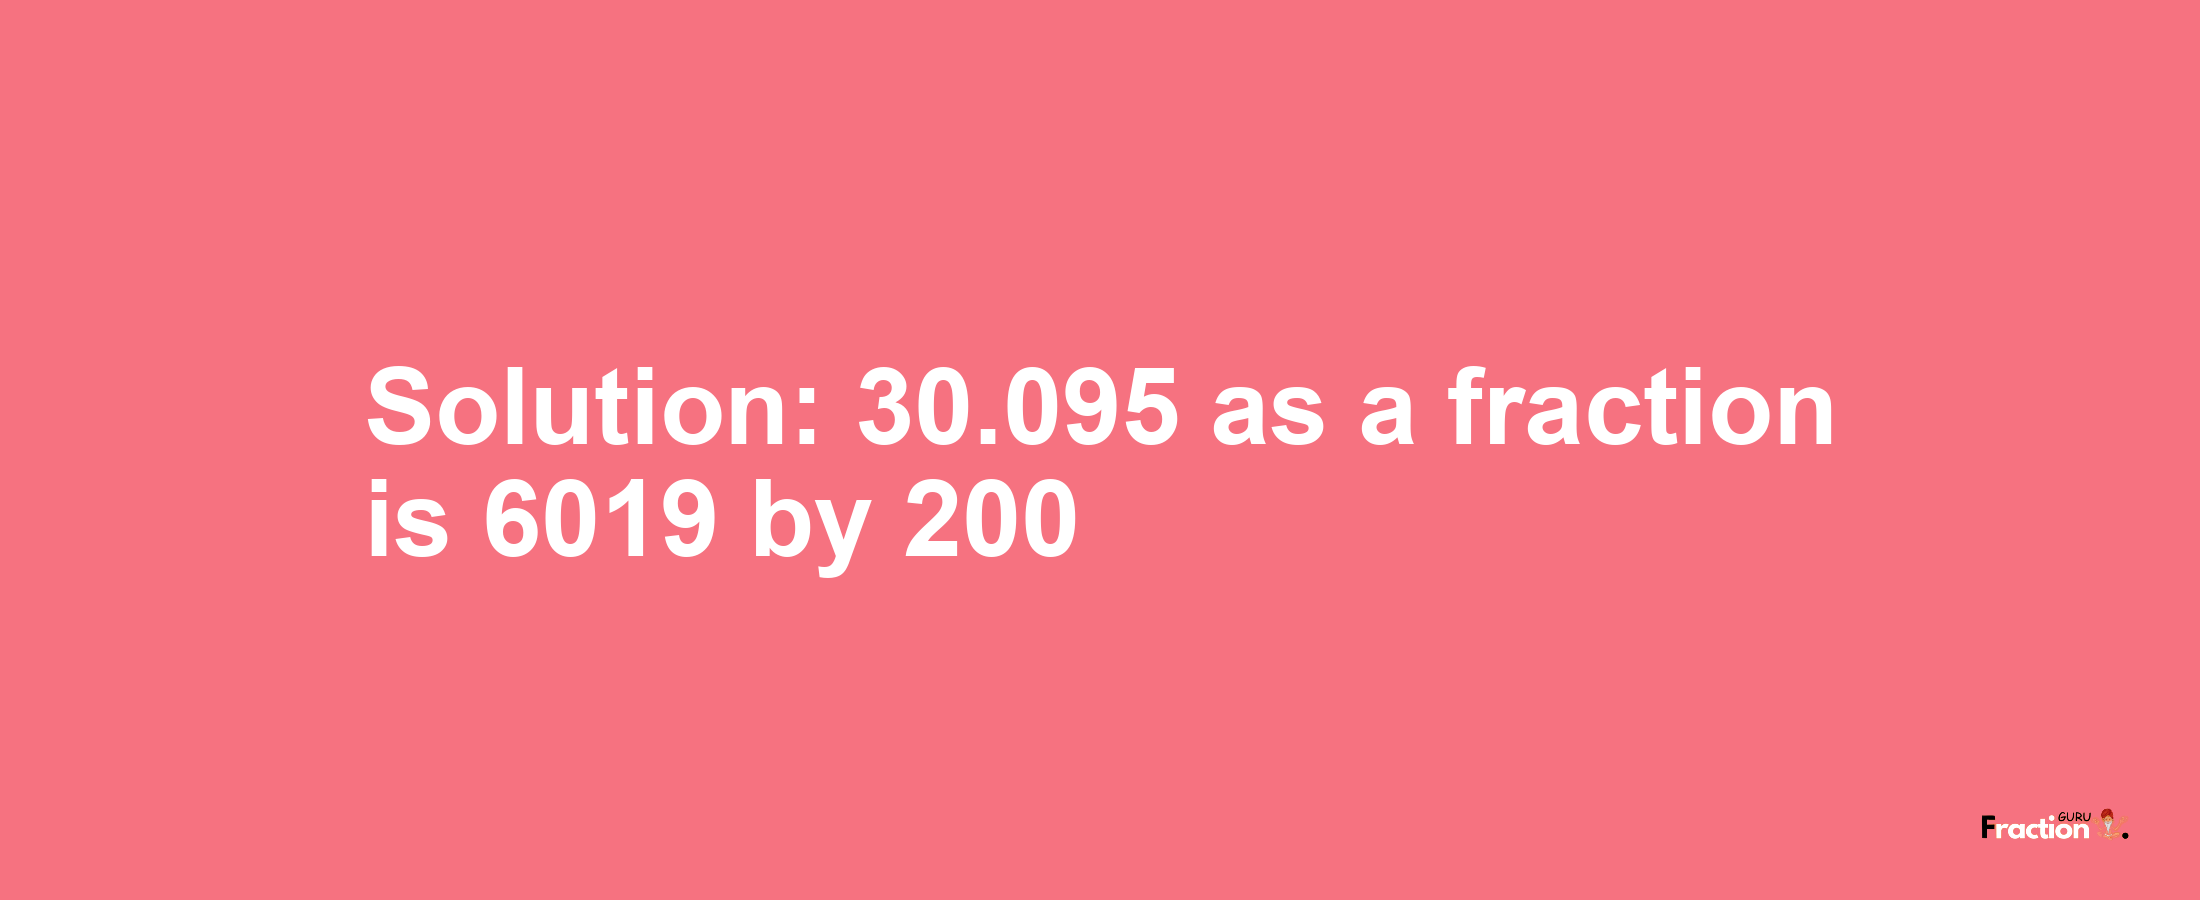 Solution:30.095 as a fraction is 6019/200